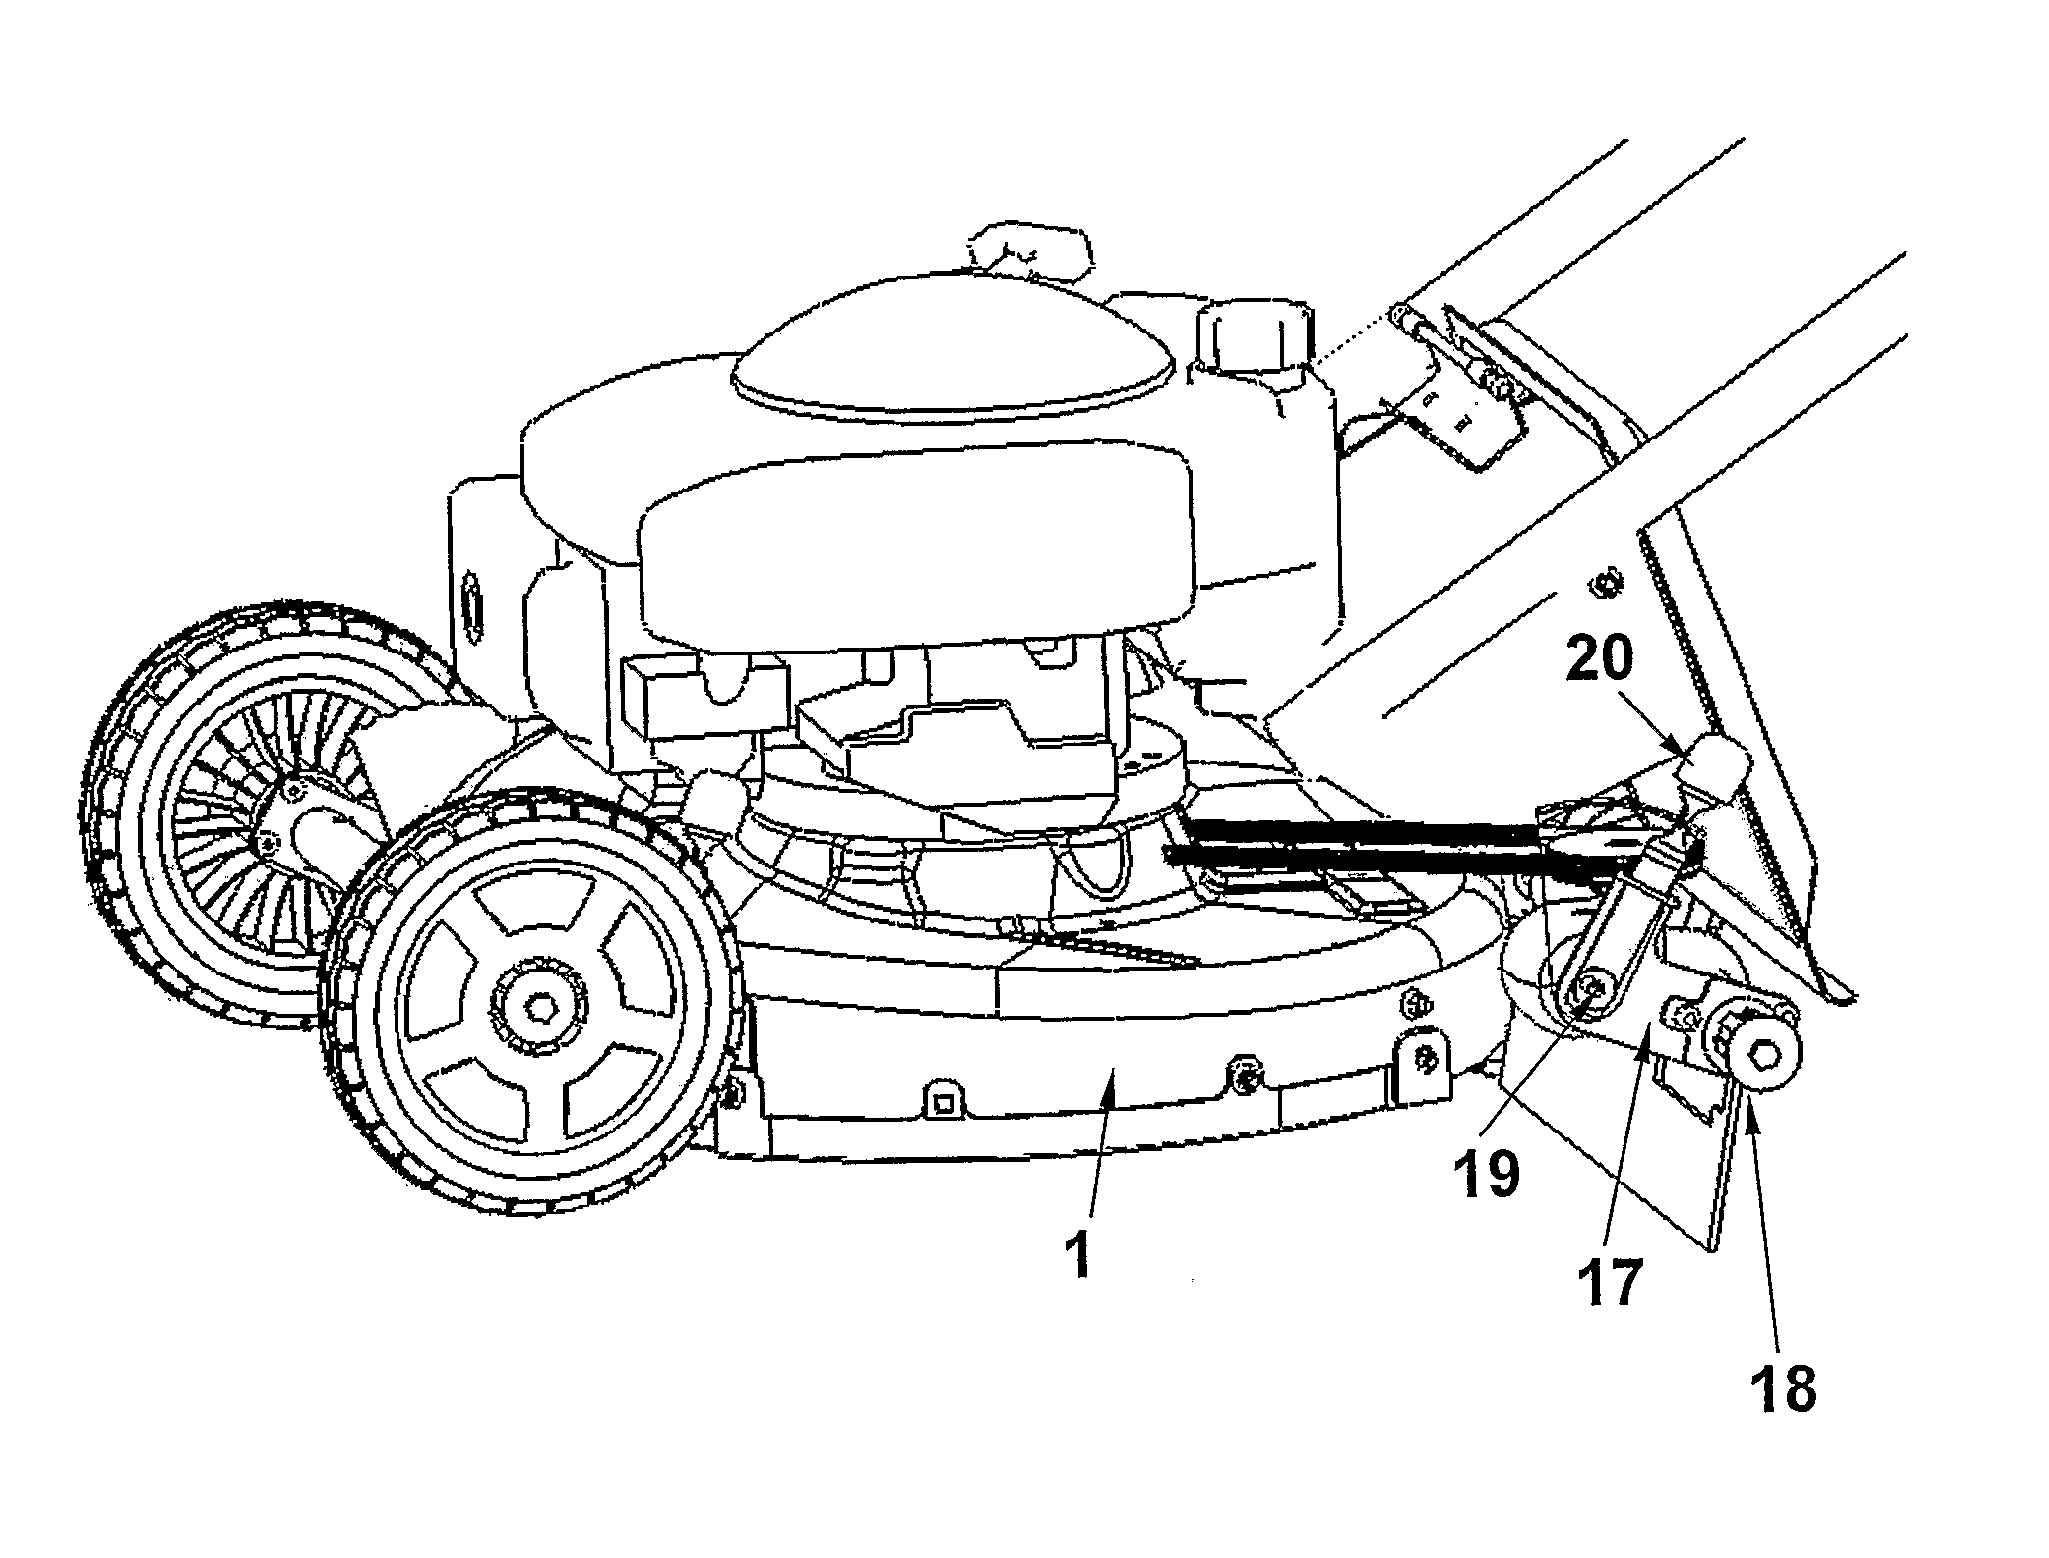 Power Transmission for a Lawn Mower and a Lawn Mower Provided with Such a Transmission